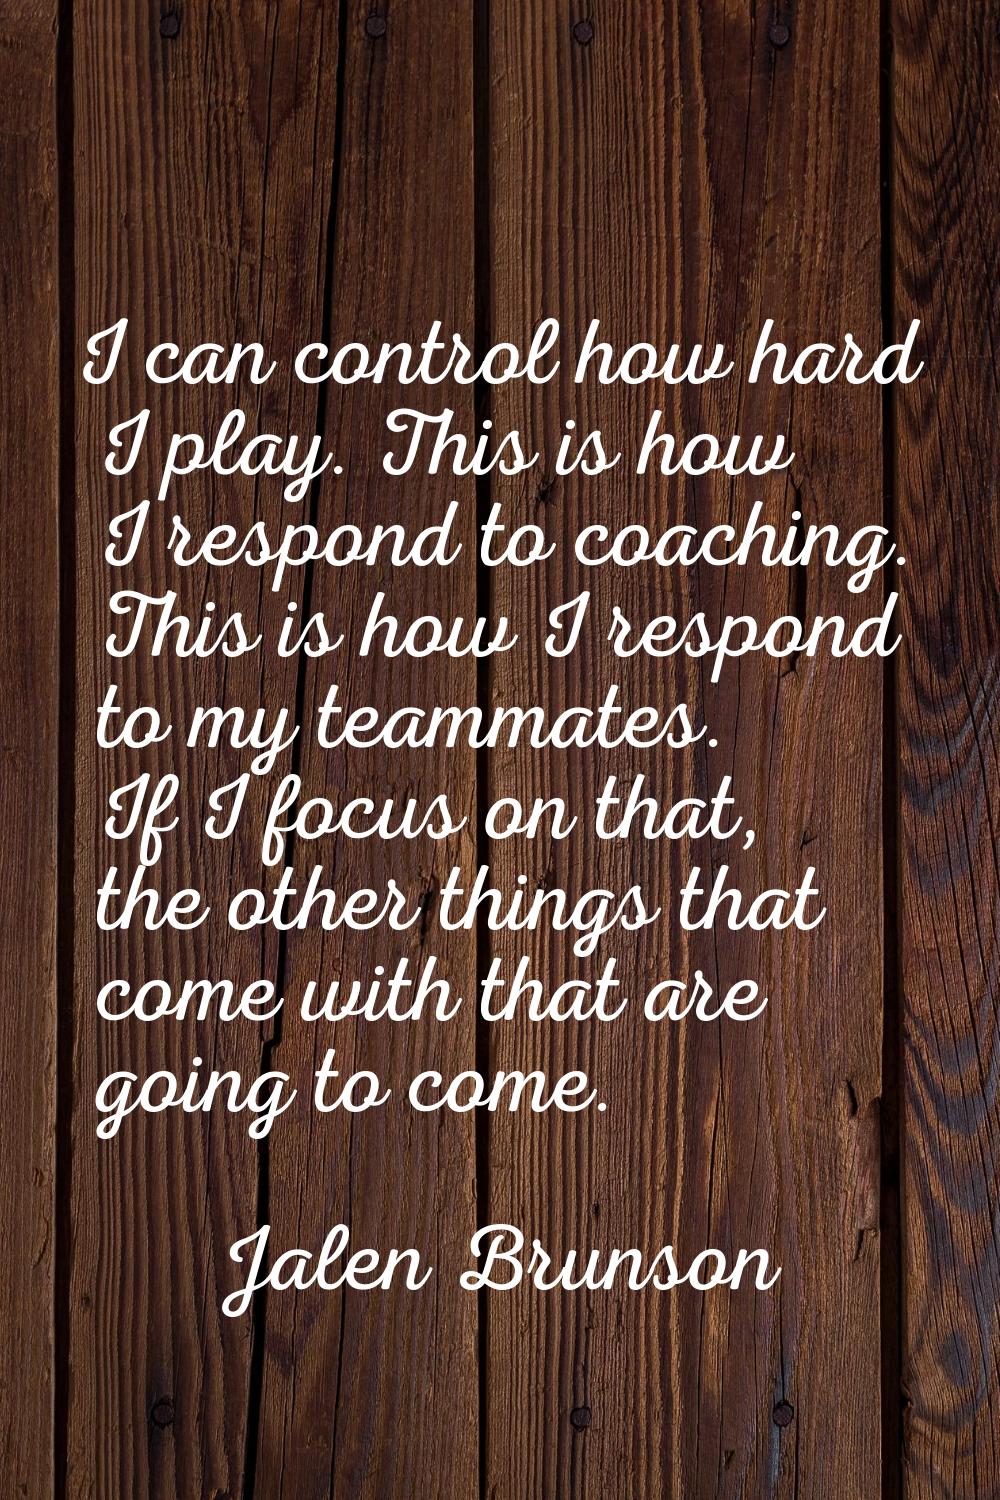 I can control how hard I play. This is how I respond to coaching. This is how I respond to my teamm